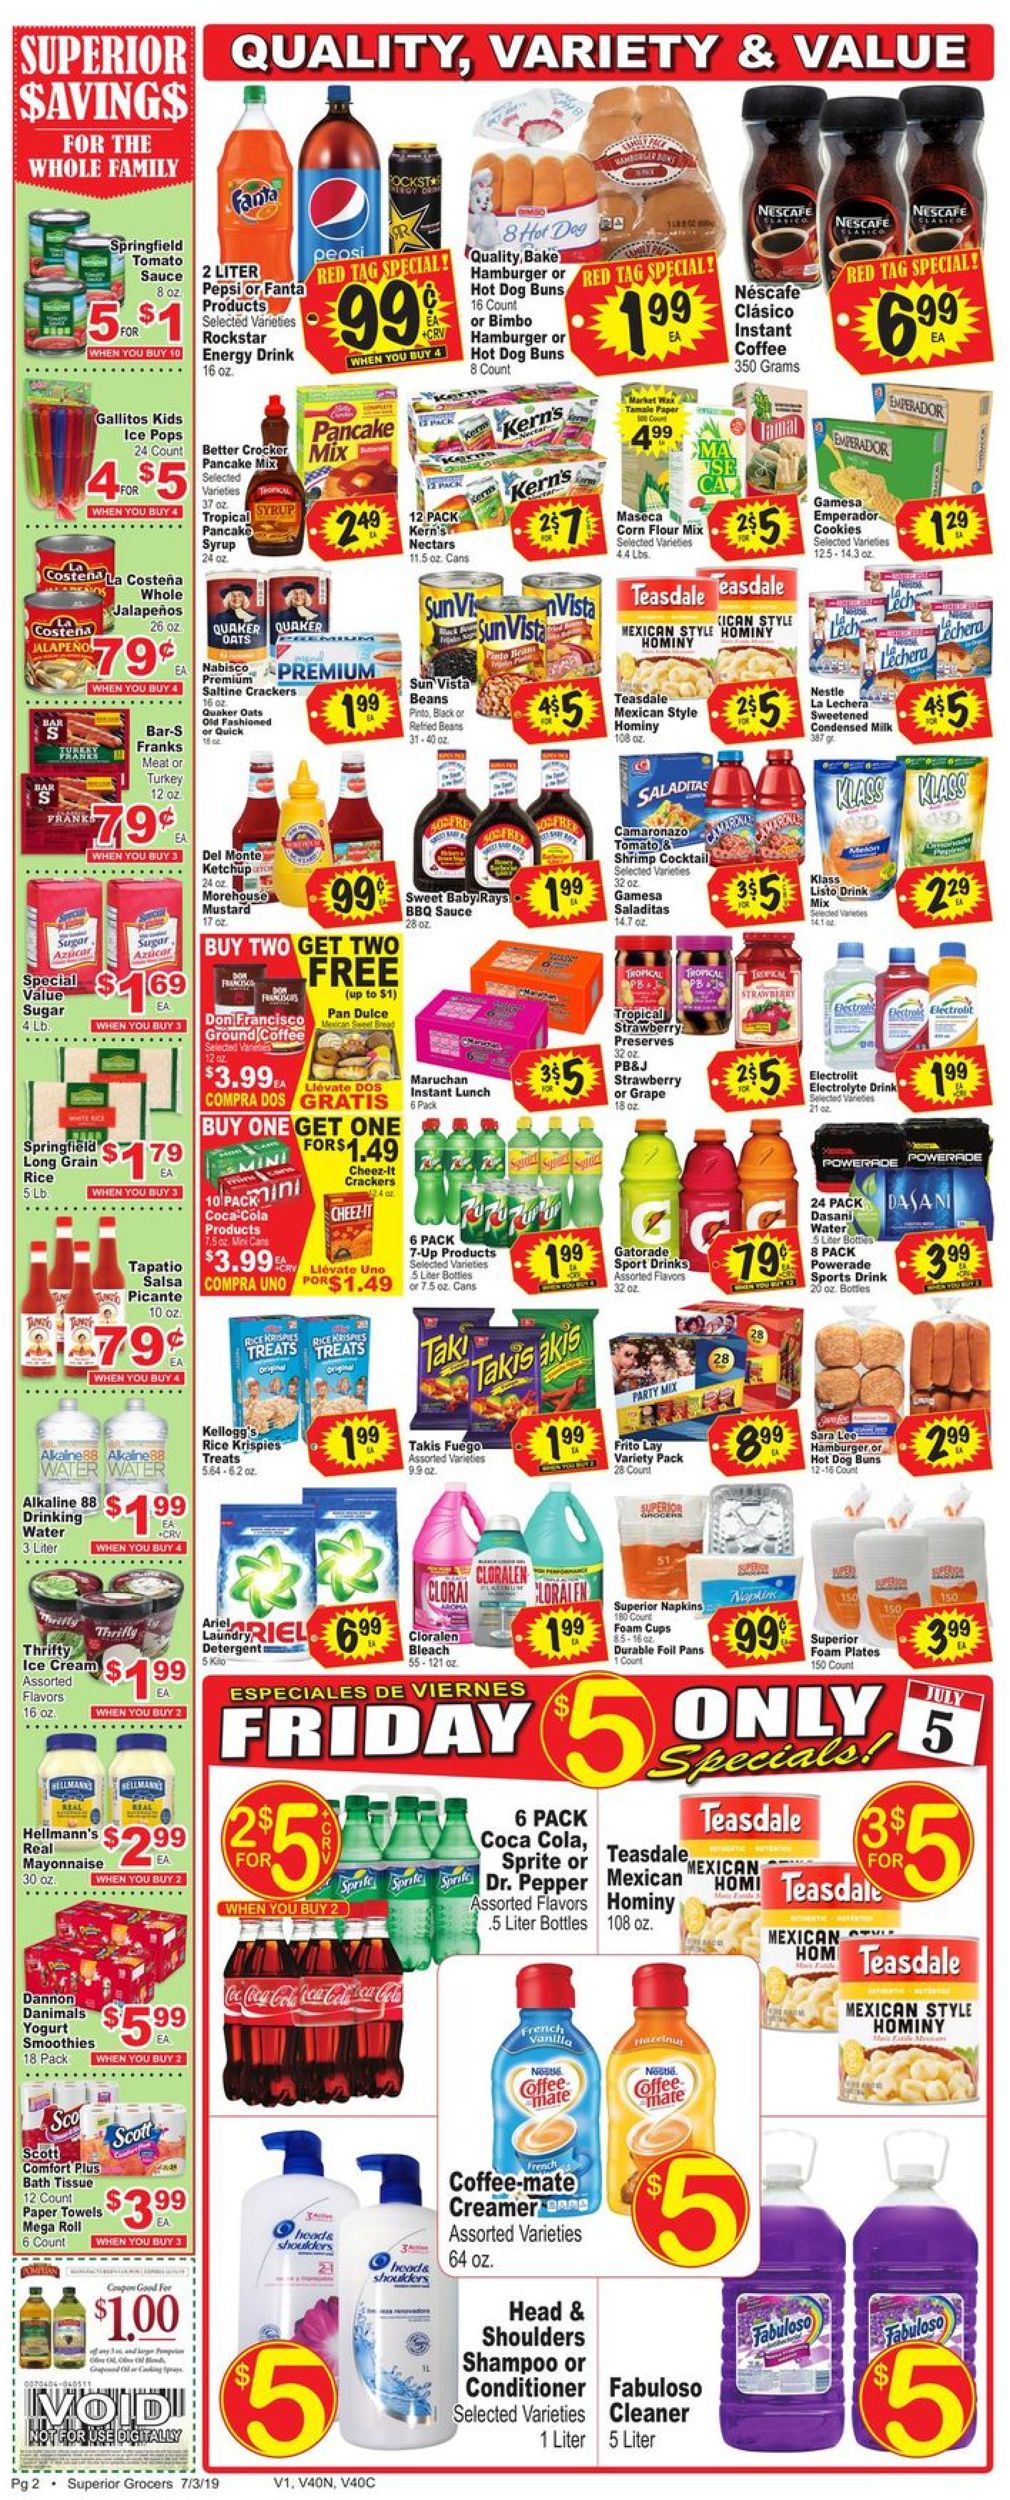 Catalogue Superior Grocers from 07/03/2019